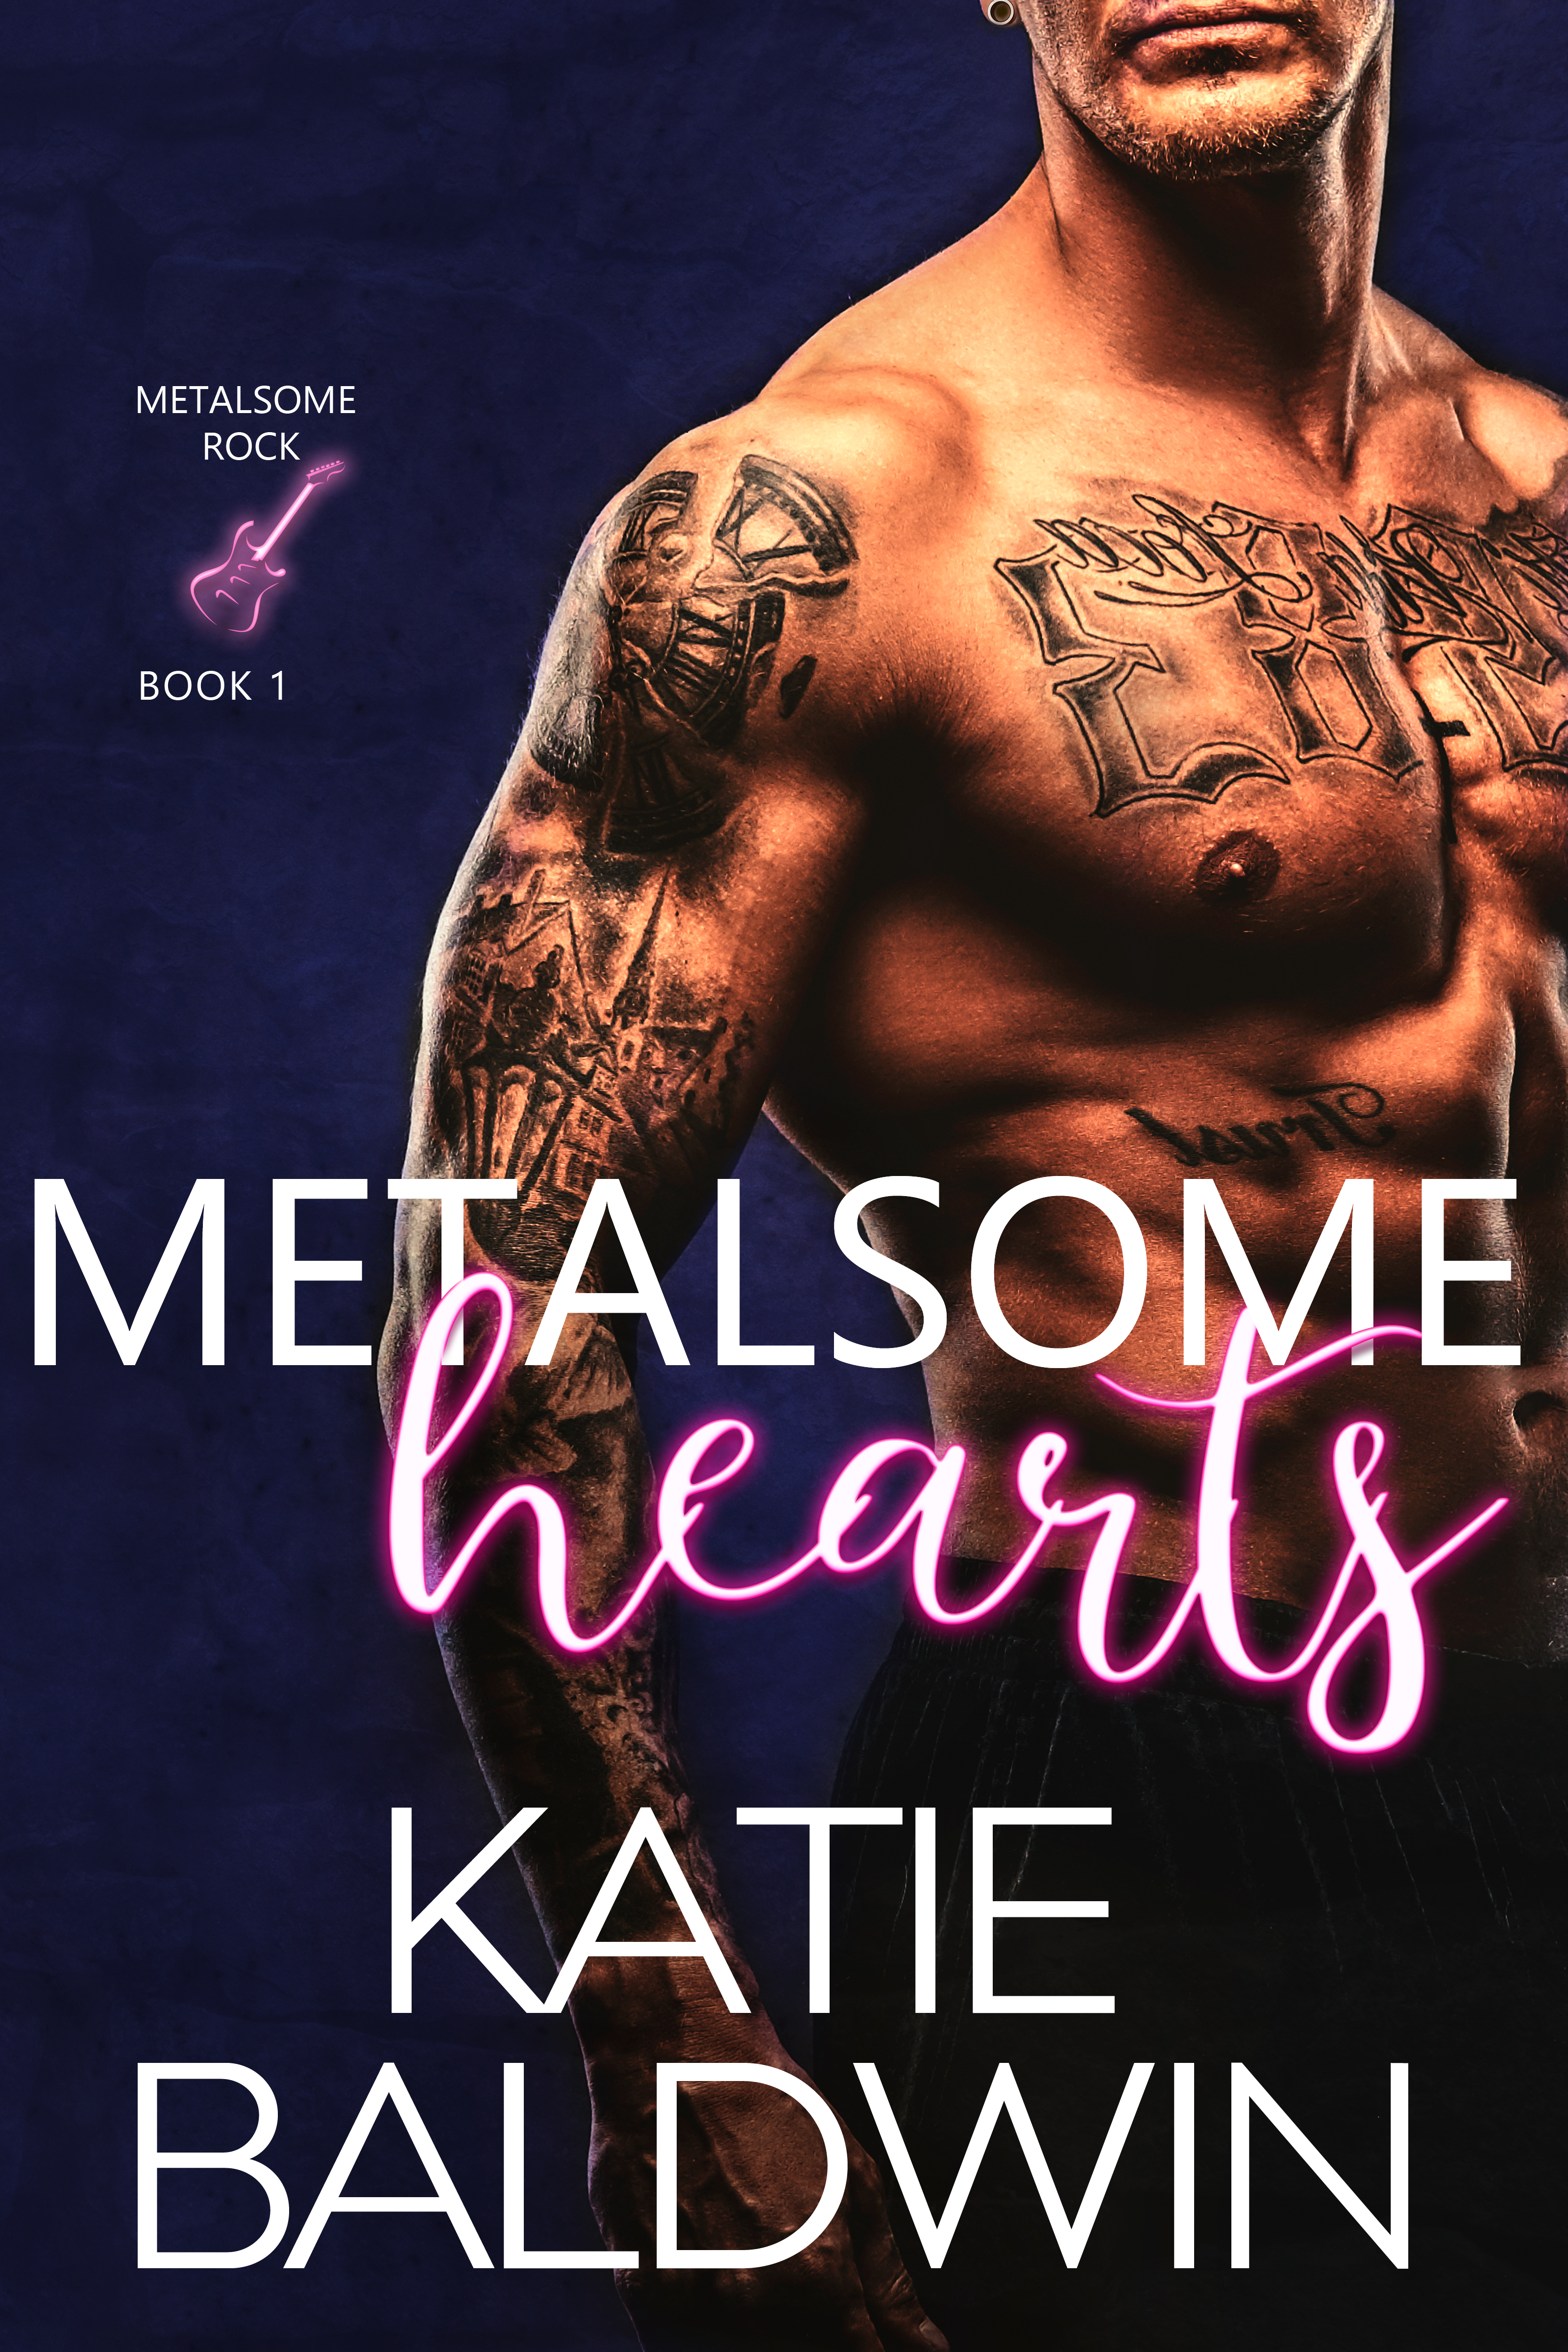 Metalsome Hearts_Cover